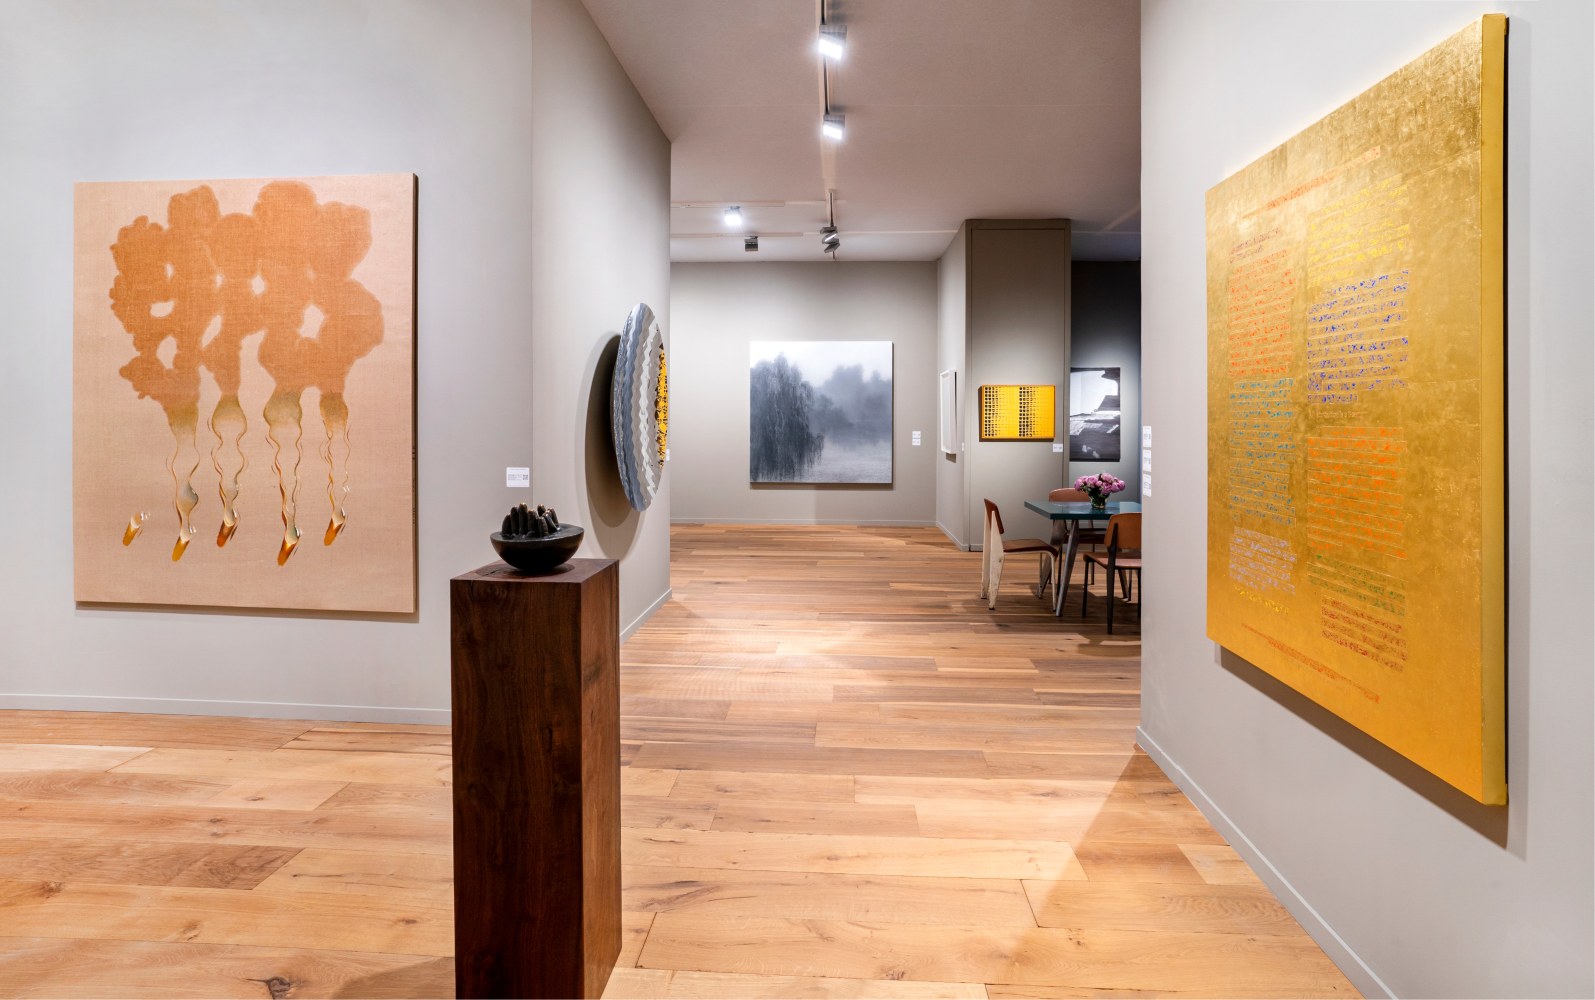 Installation view of TEFAF 2022 Tina Kim Gallery (Booth 437). Photo: Harry Heuts